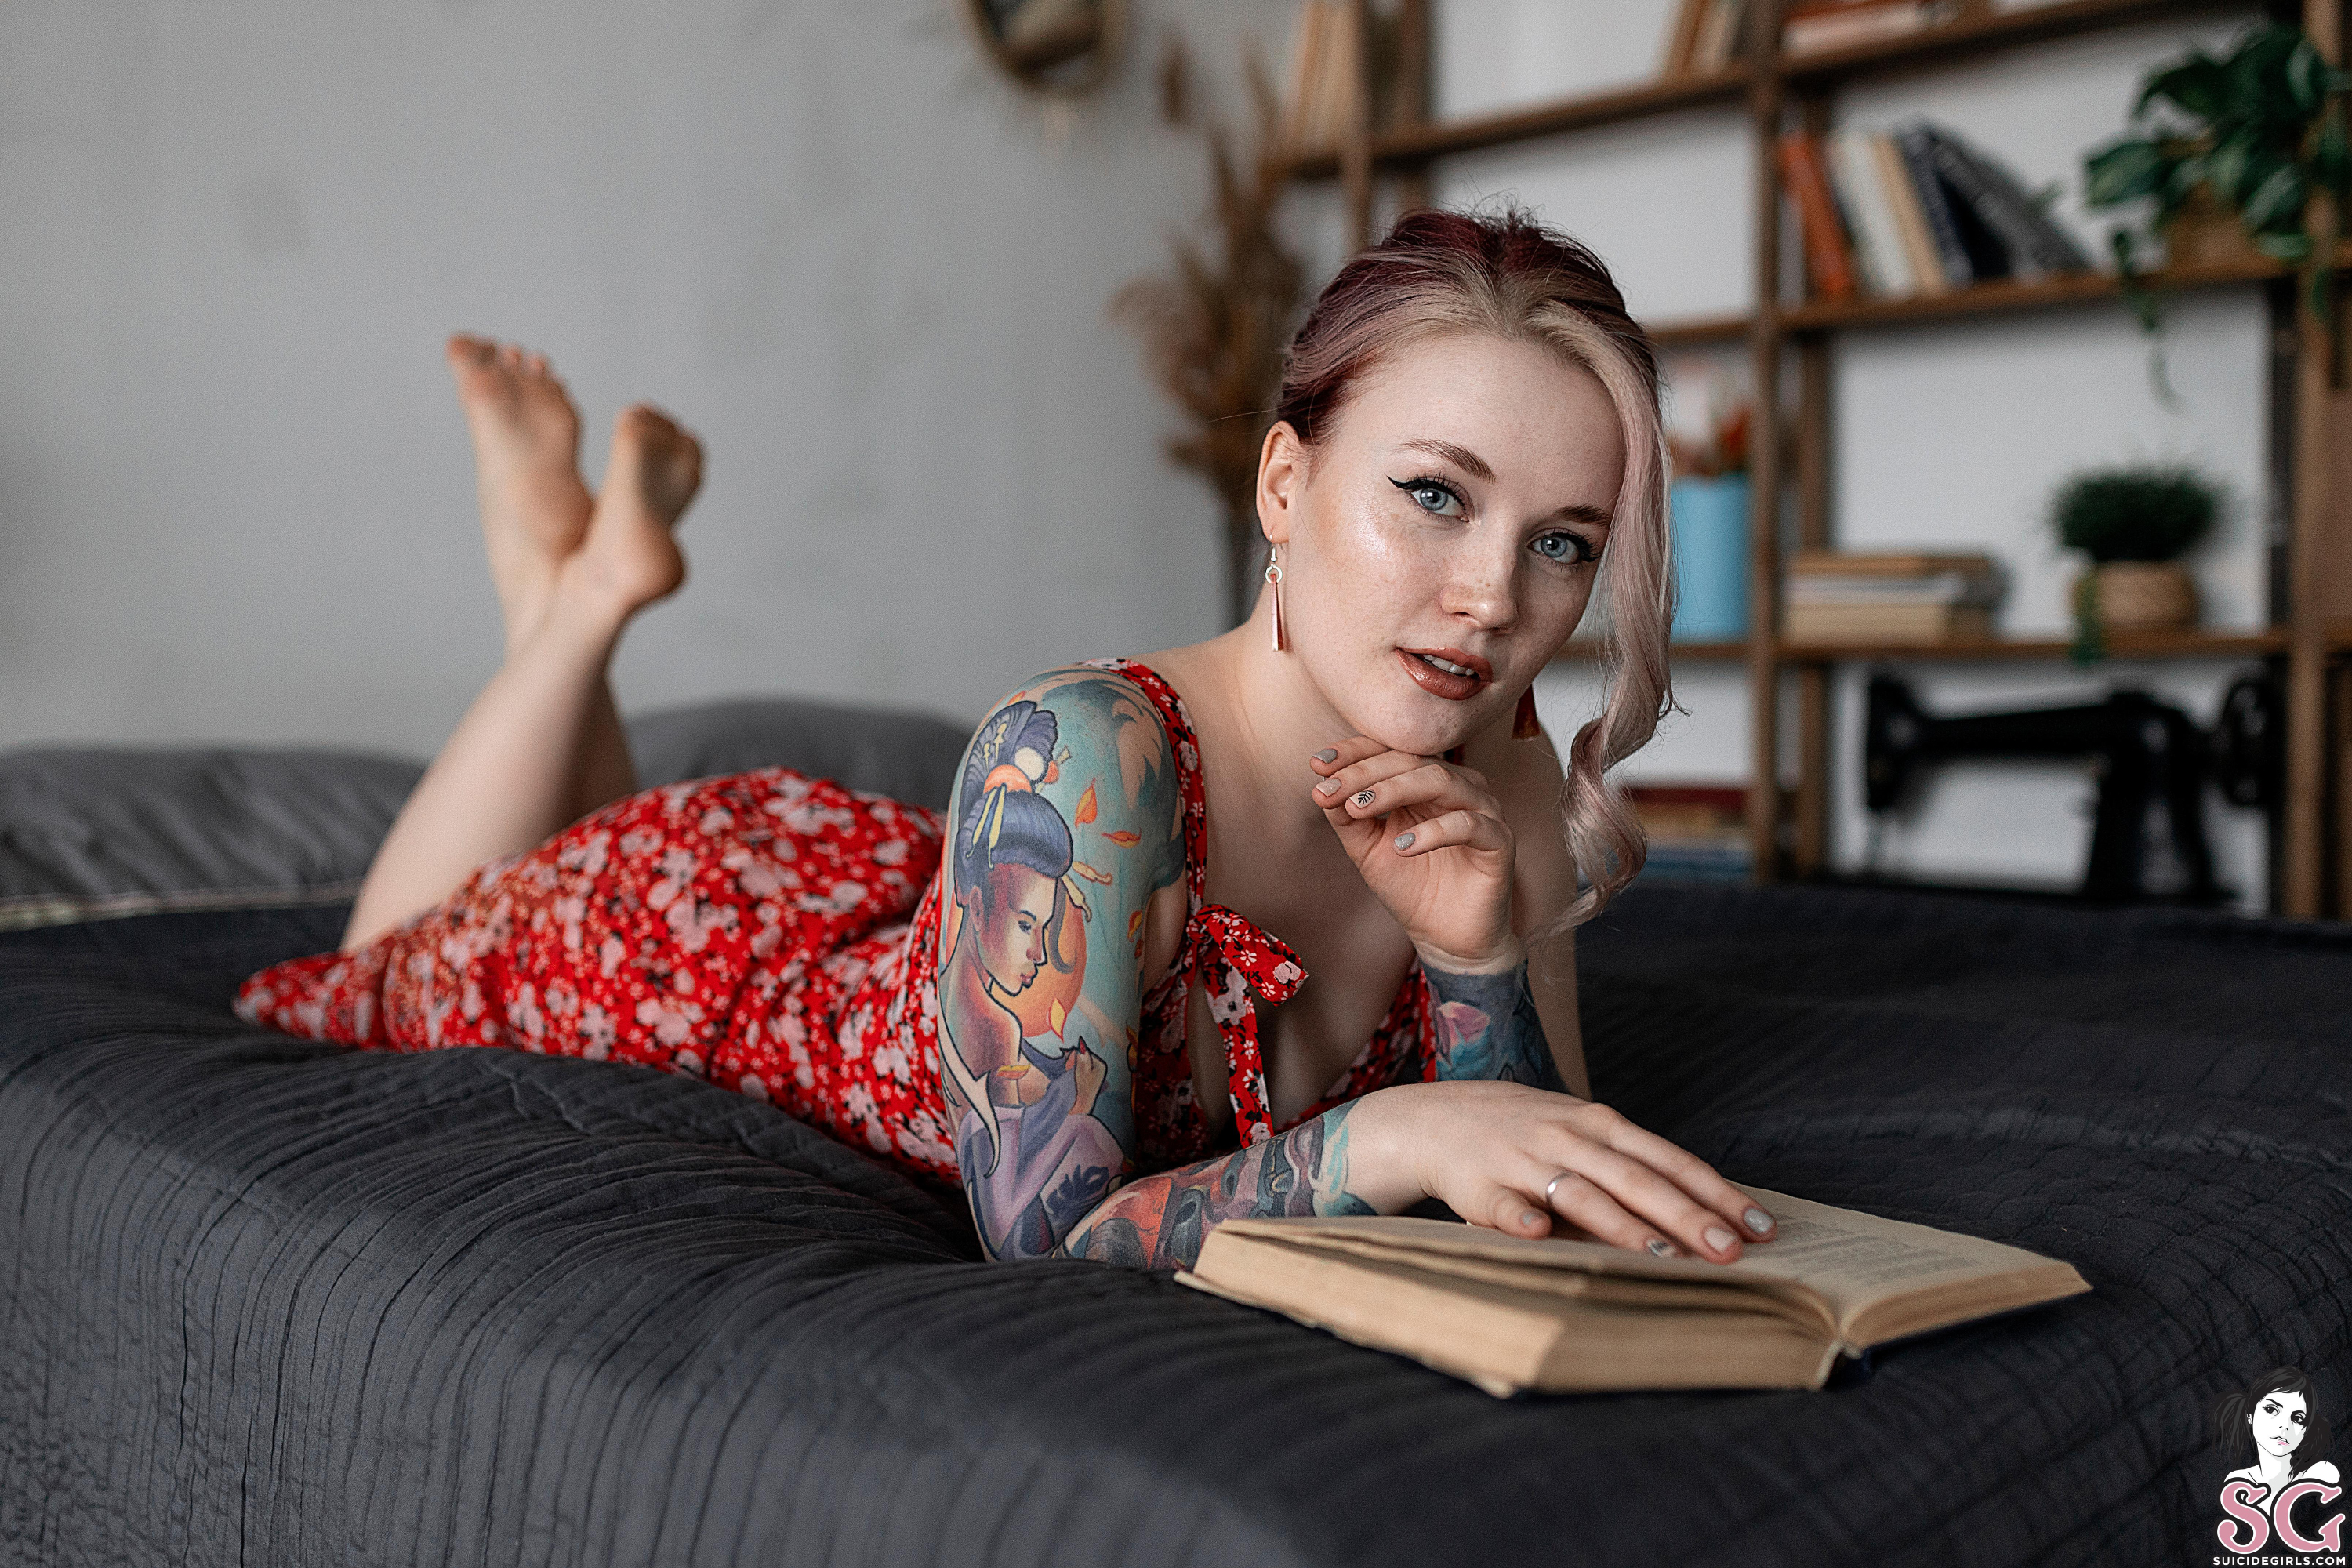 Watermarked Women Dyed Hair Tattoo Lying On Front Painted Nails Dress Bed In Bed Reading 3000x2000